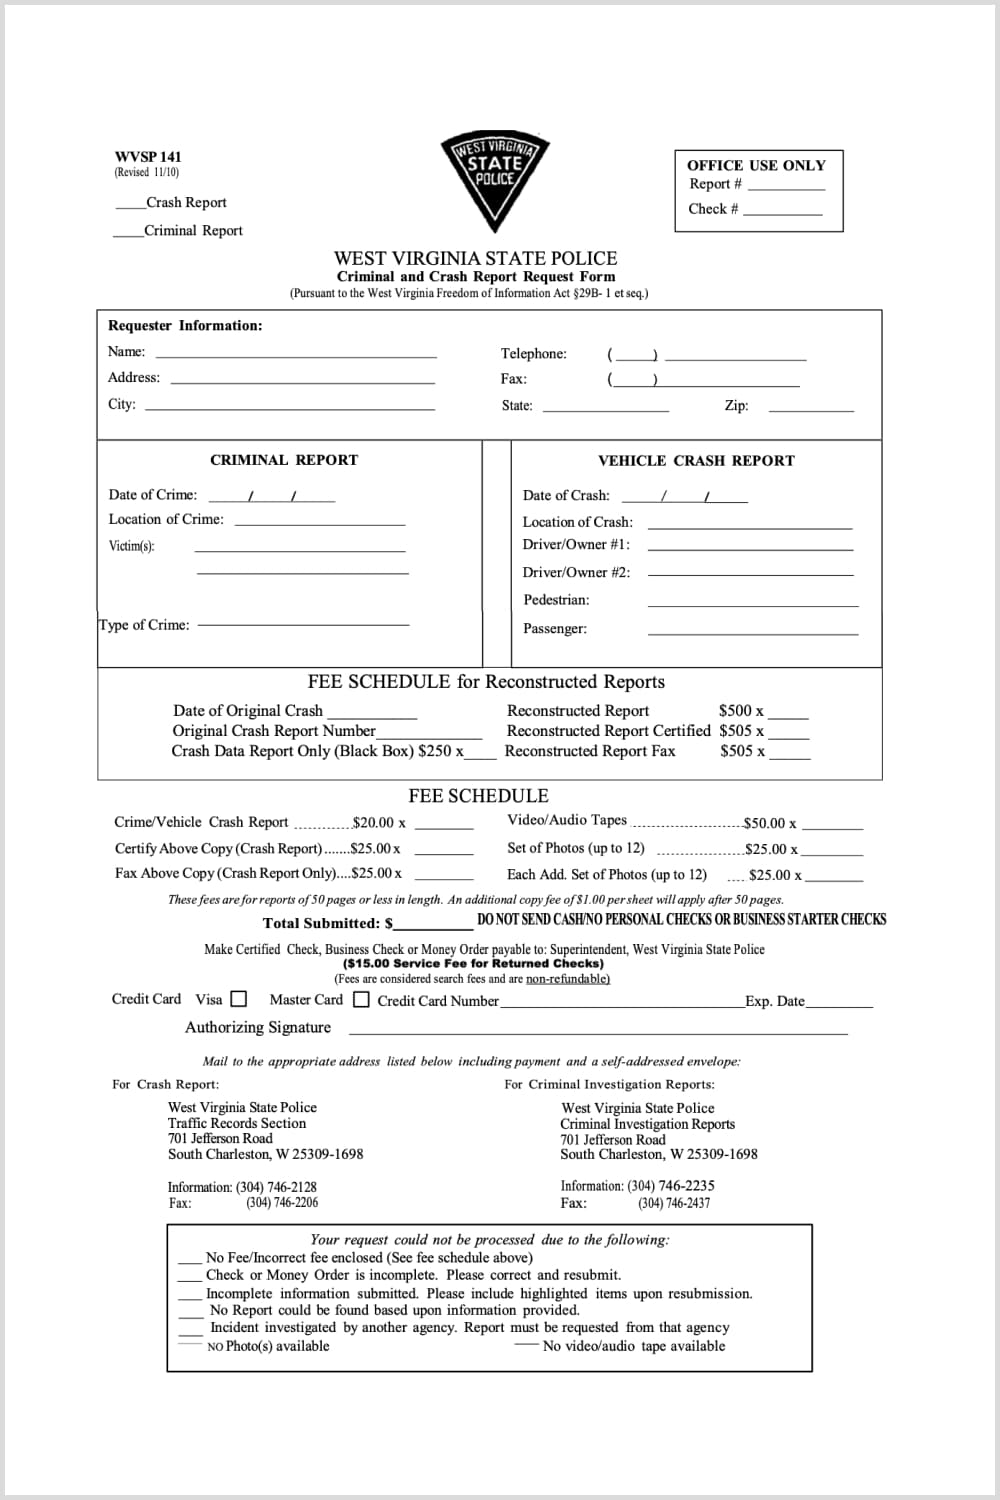 Image of an official police report with tables and questions.